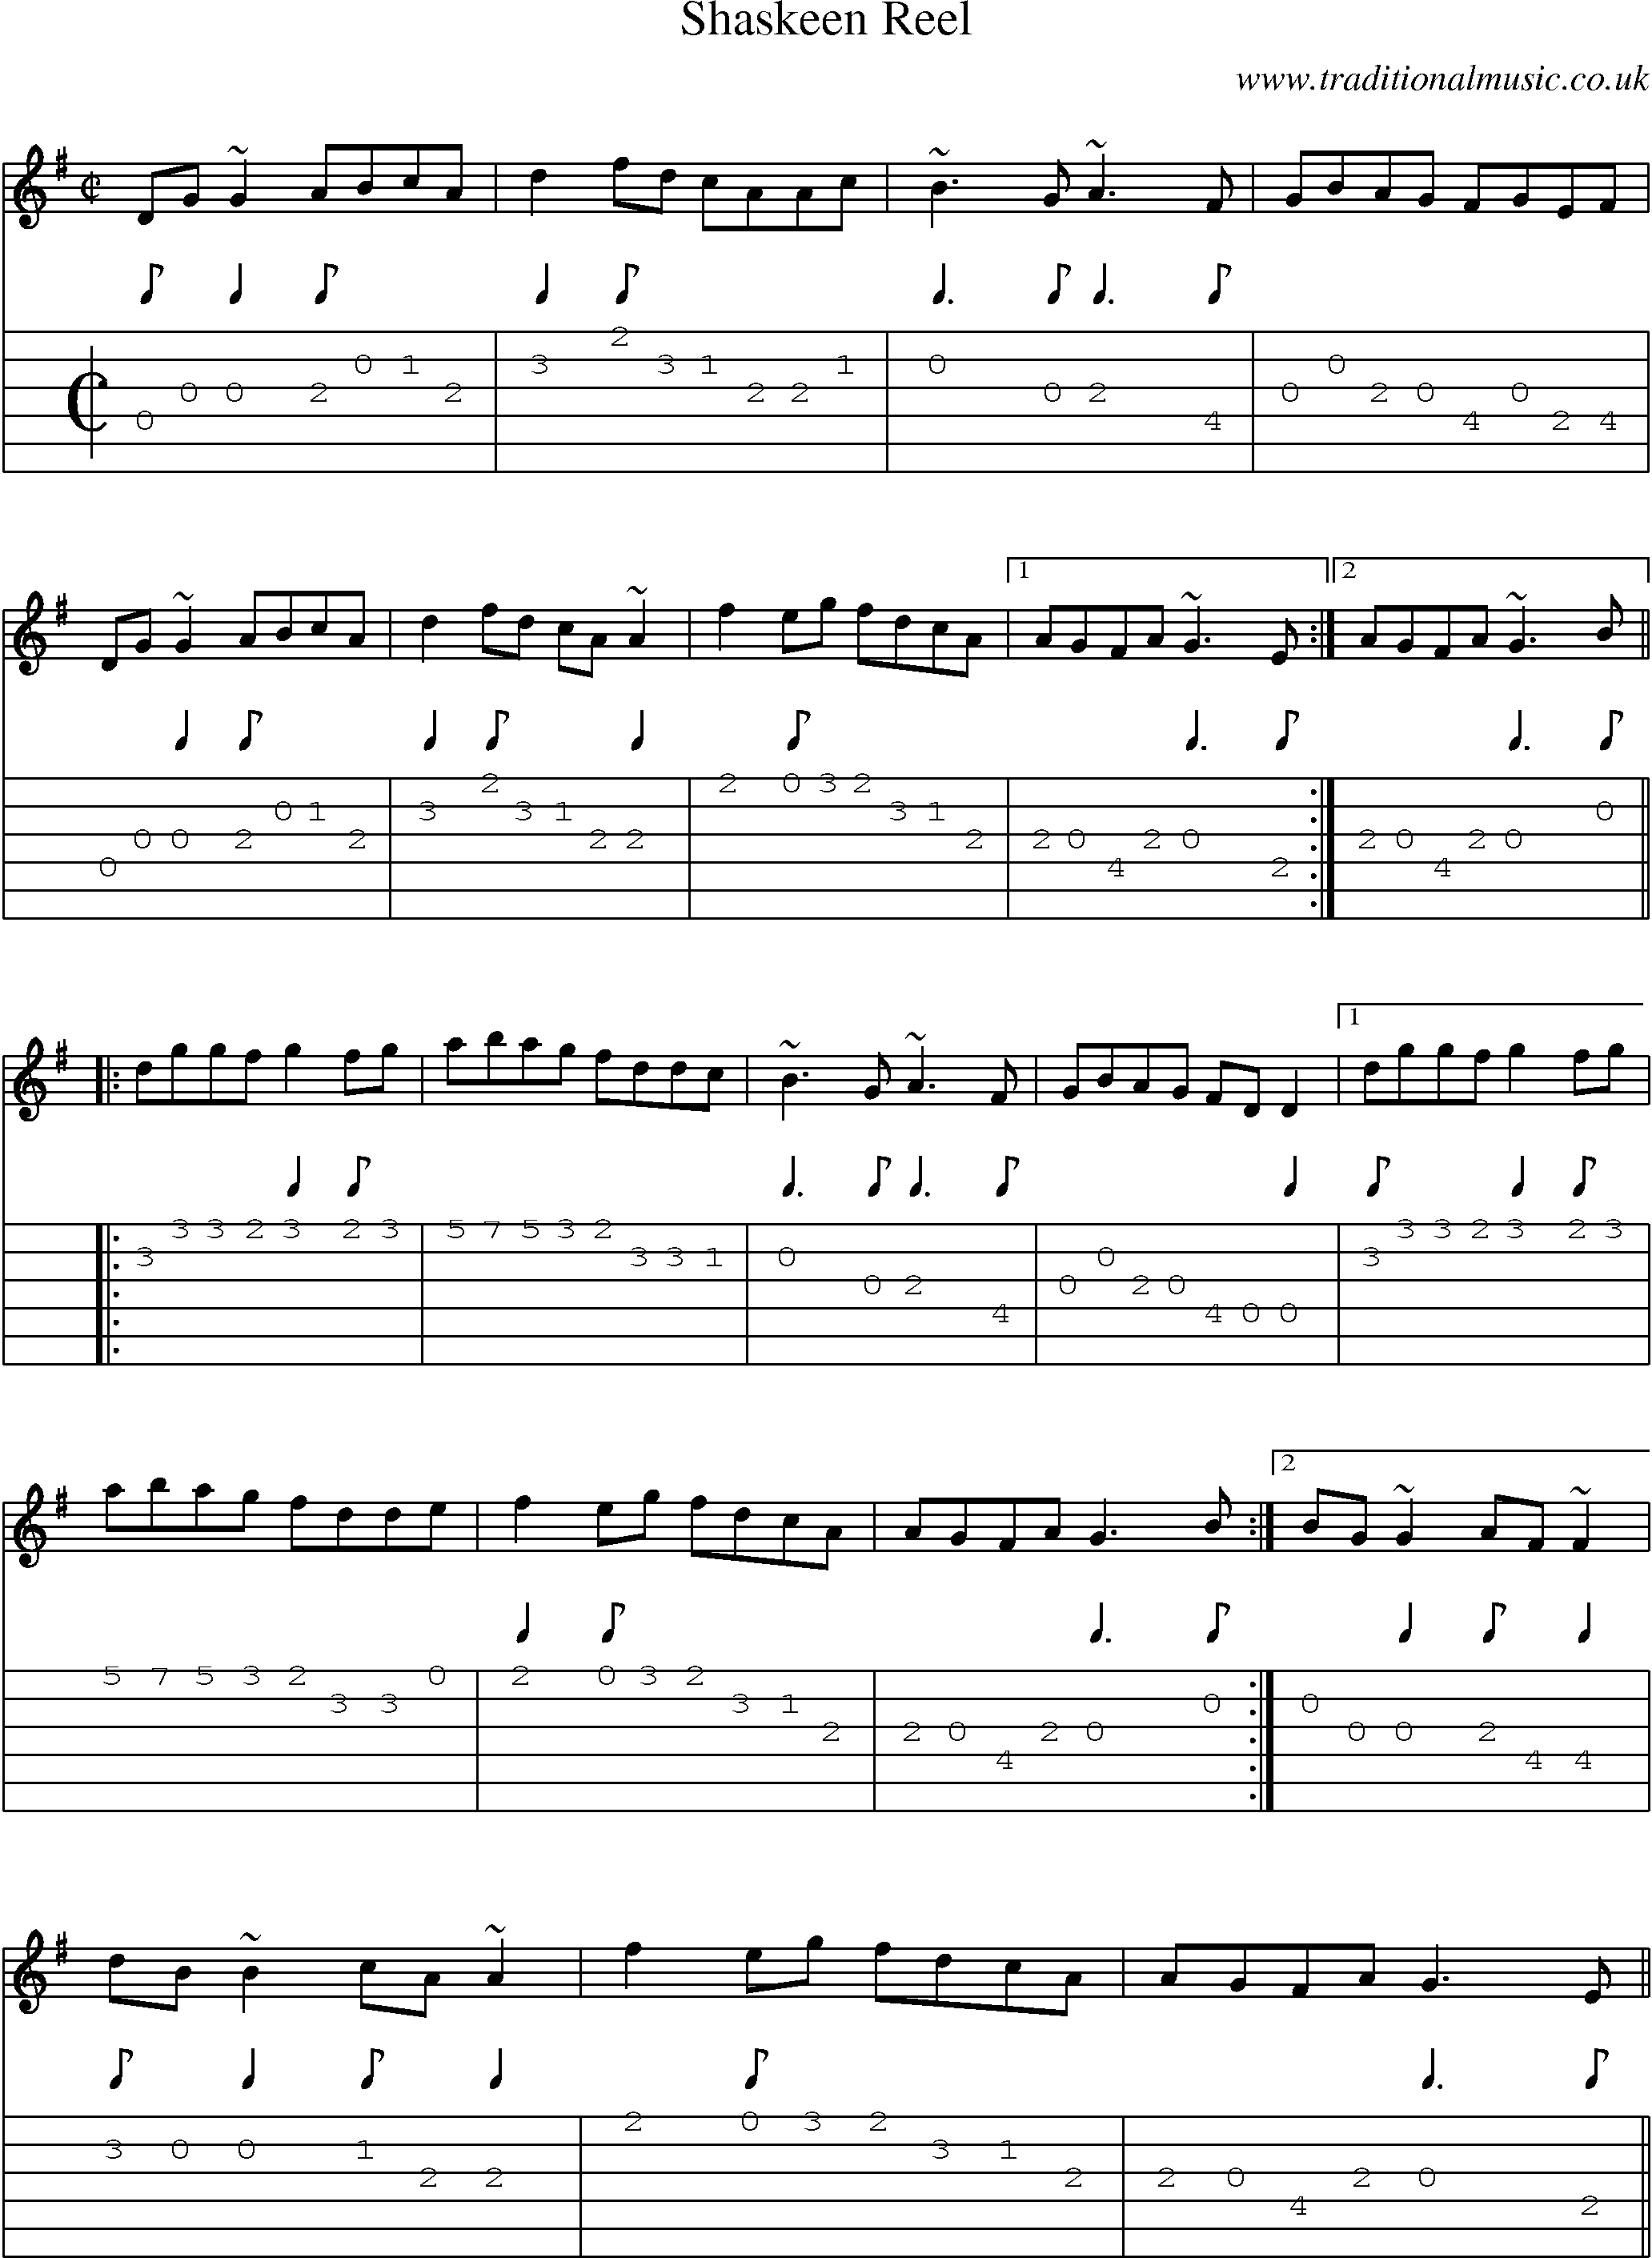 Music Score and Guitar Tabs for Shaskeen Reel